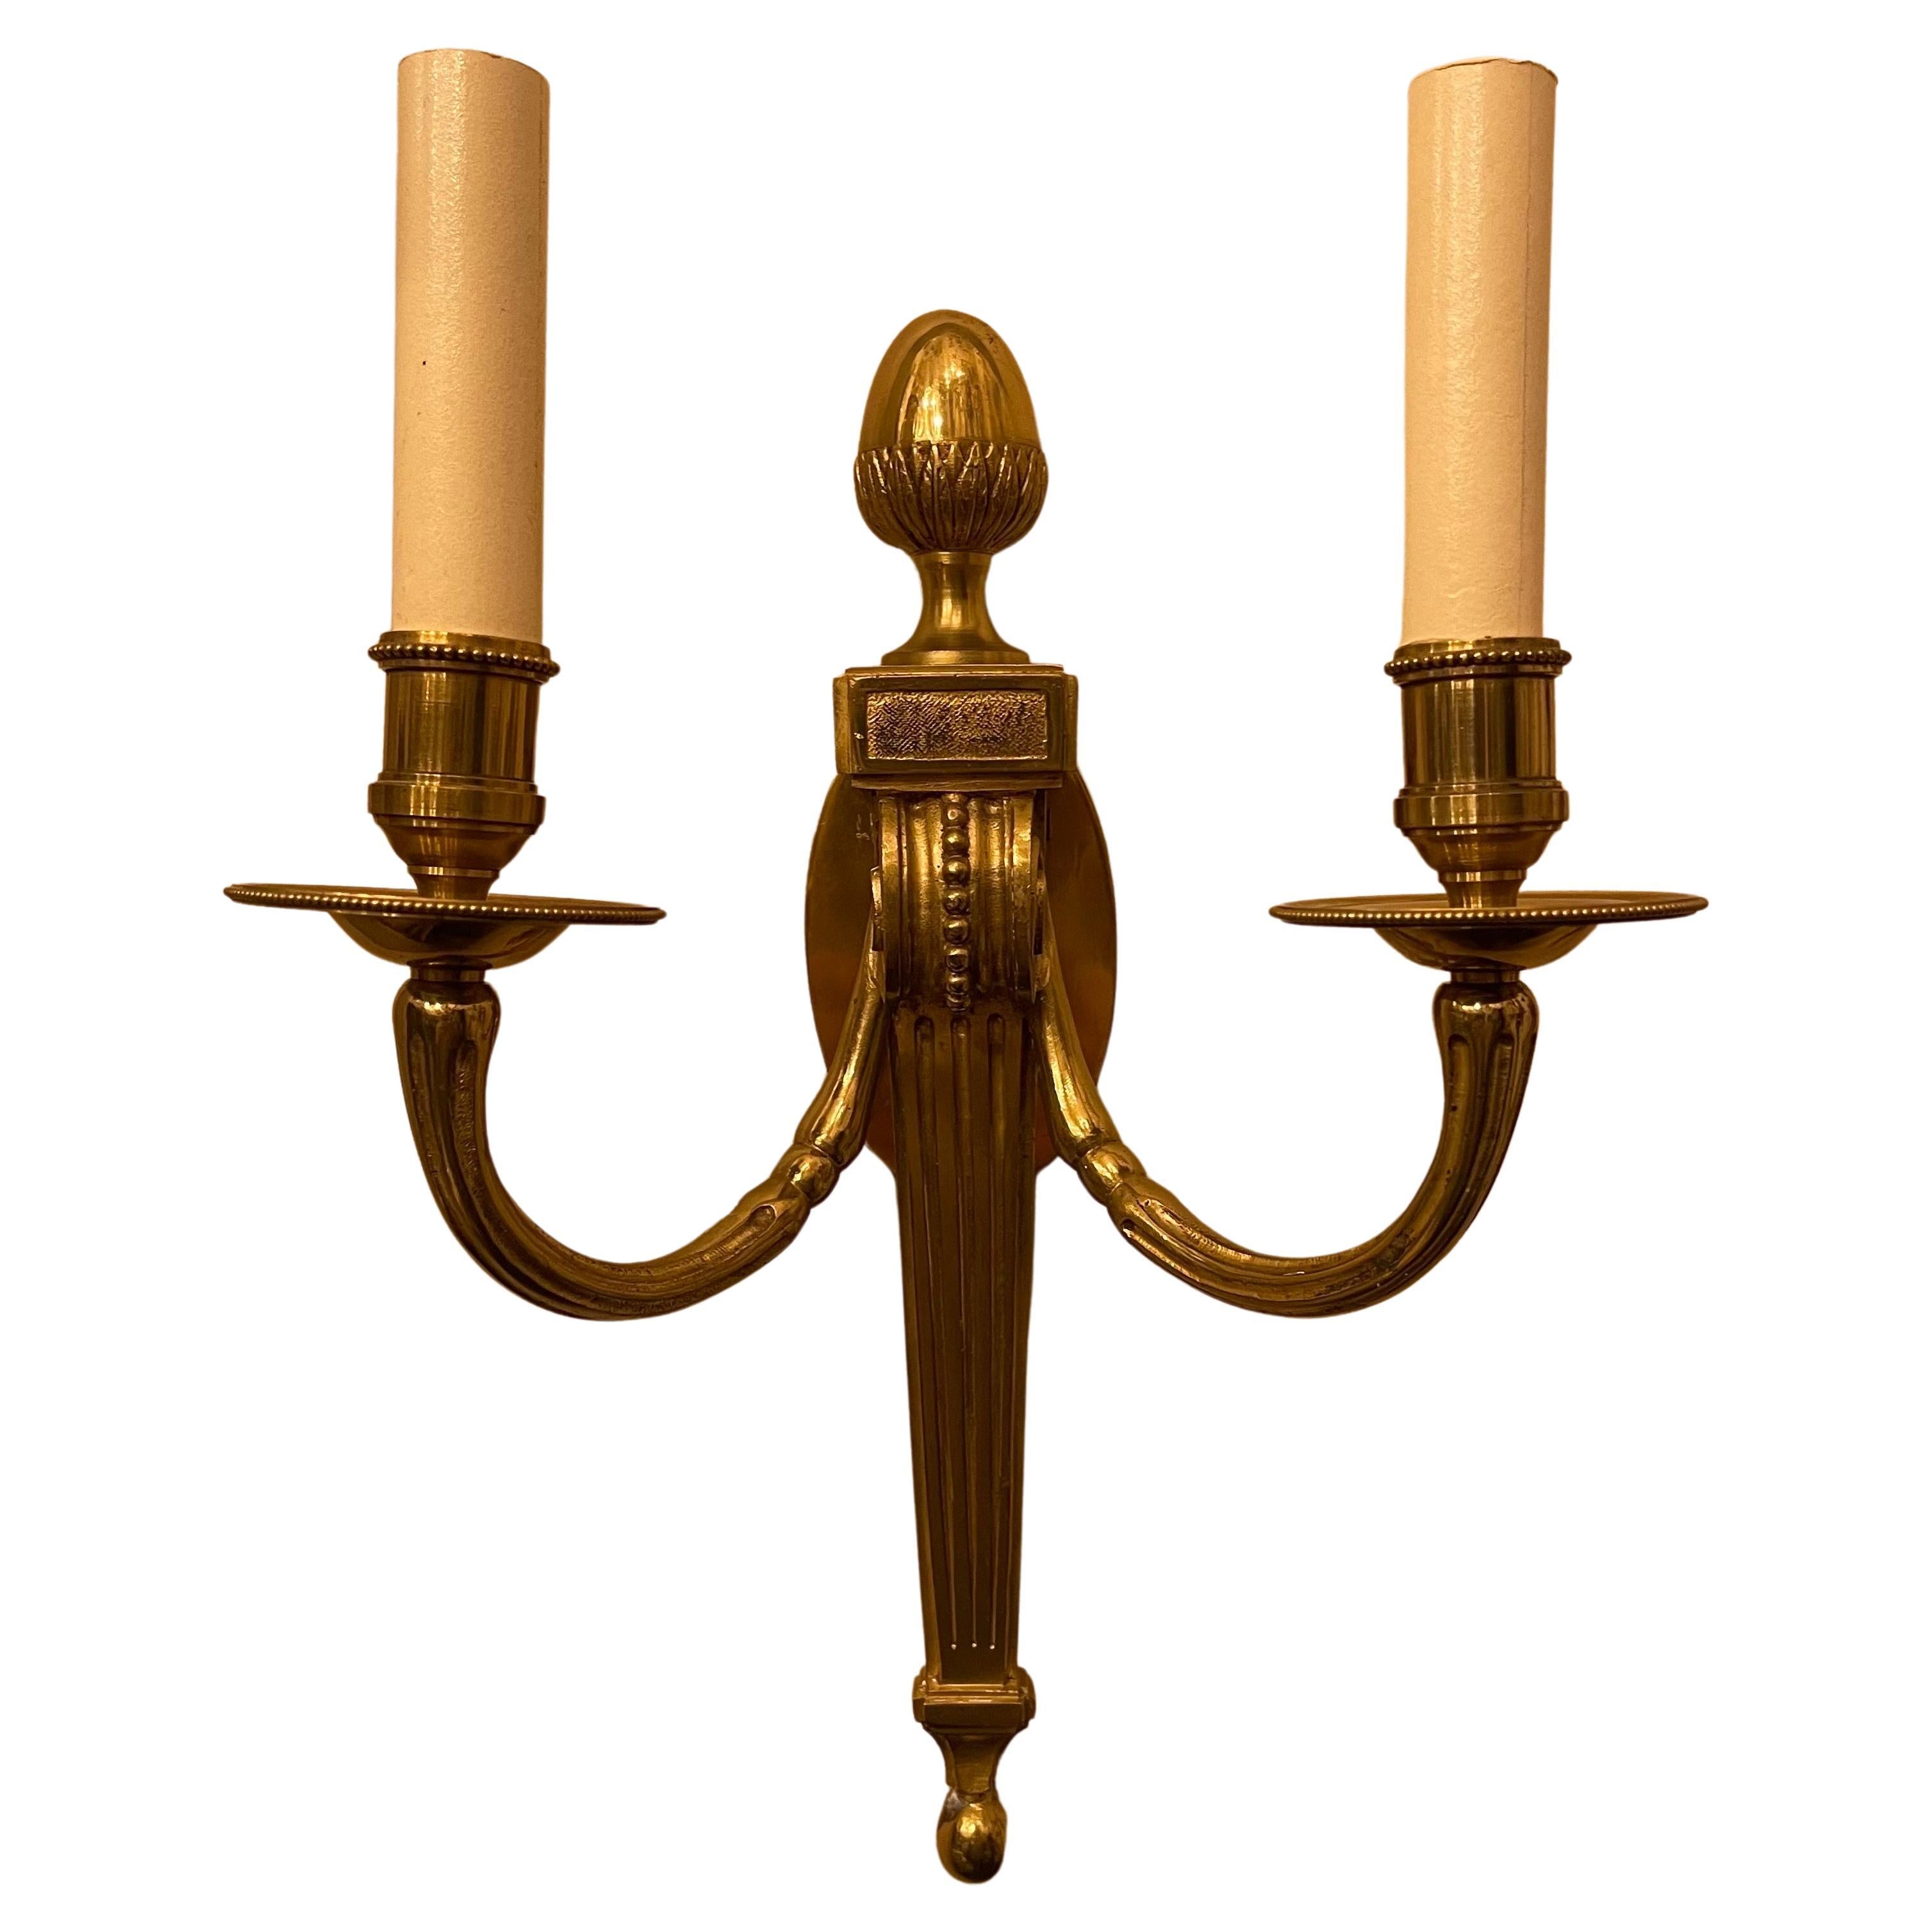 A Wonderful Pair Of Vaughan Designs French Empire Neoclassical bronze Urn two Candelabra Sconces with finaial top.